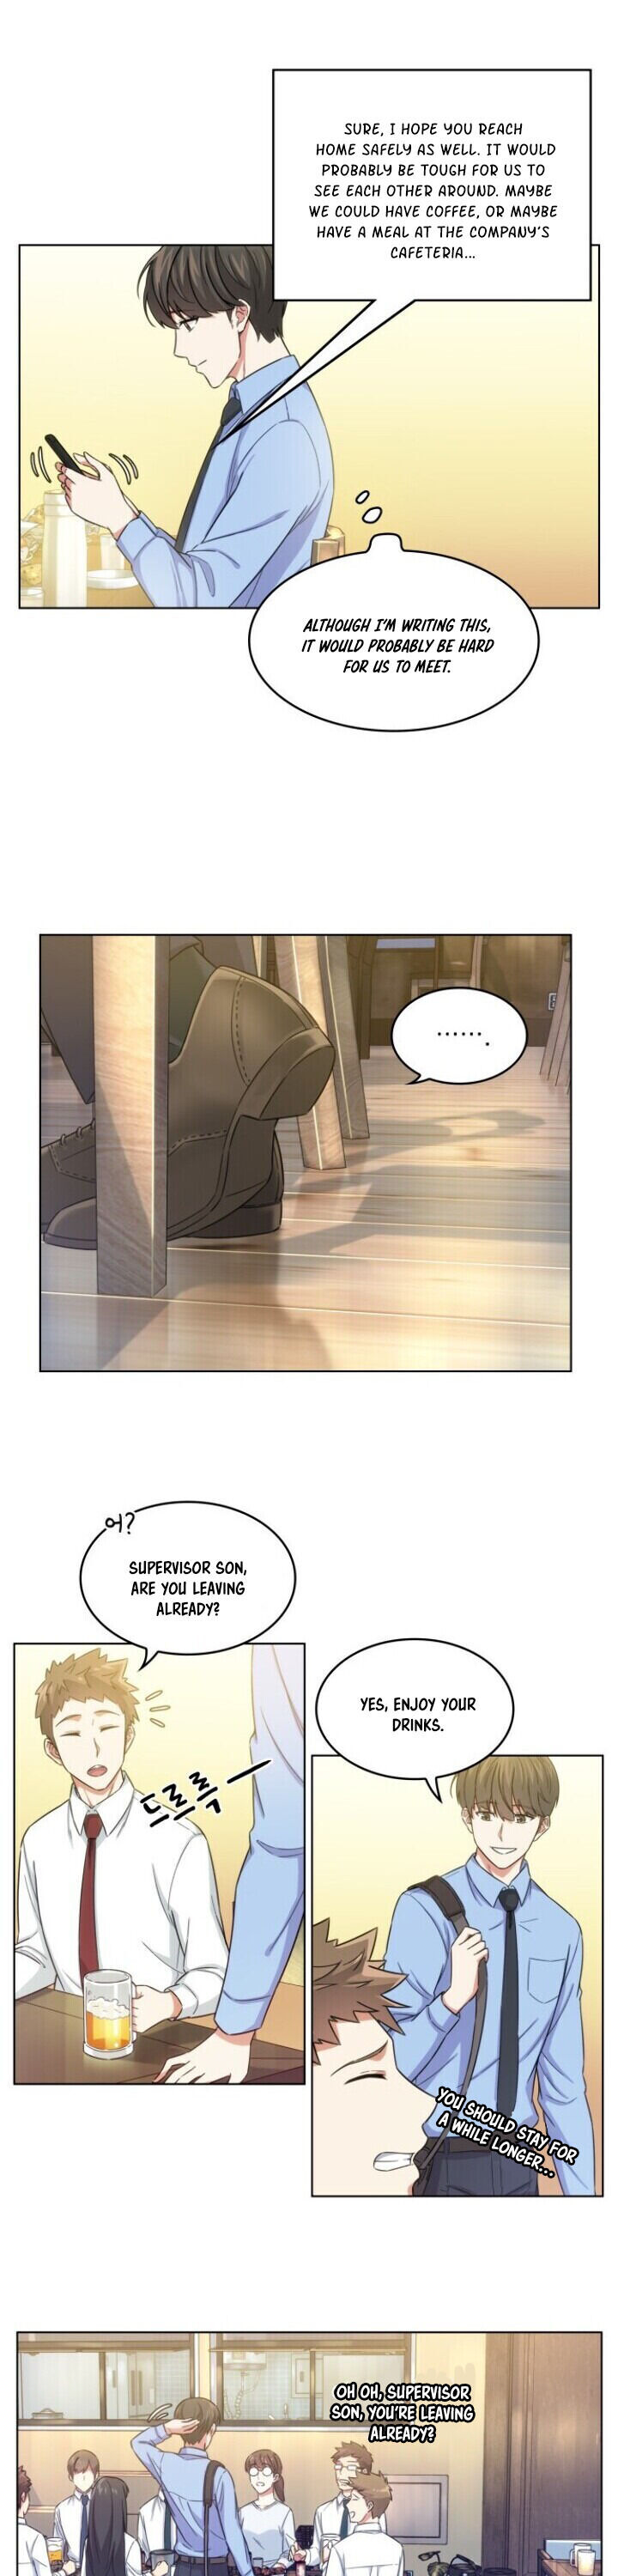 My Office Noona’s Story - Chapter 11 Page 6